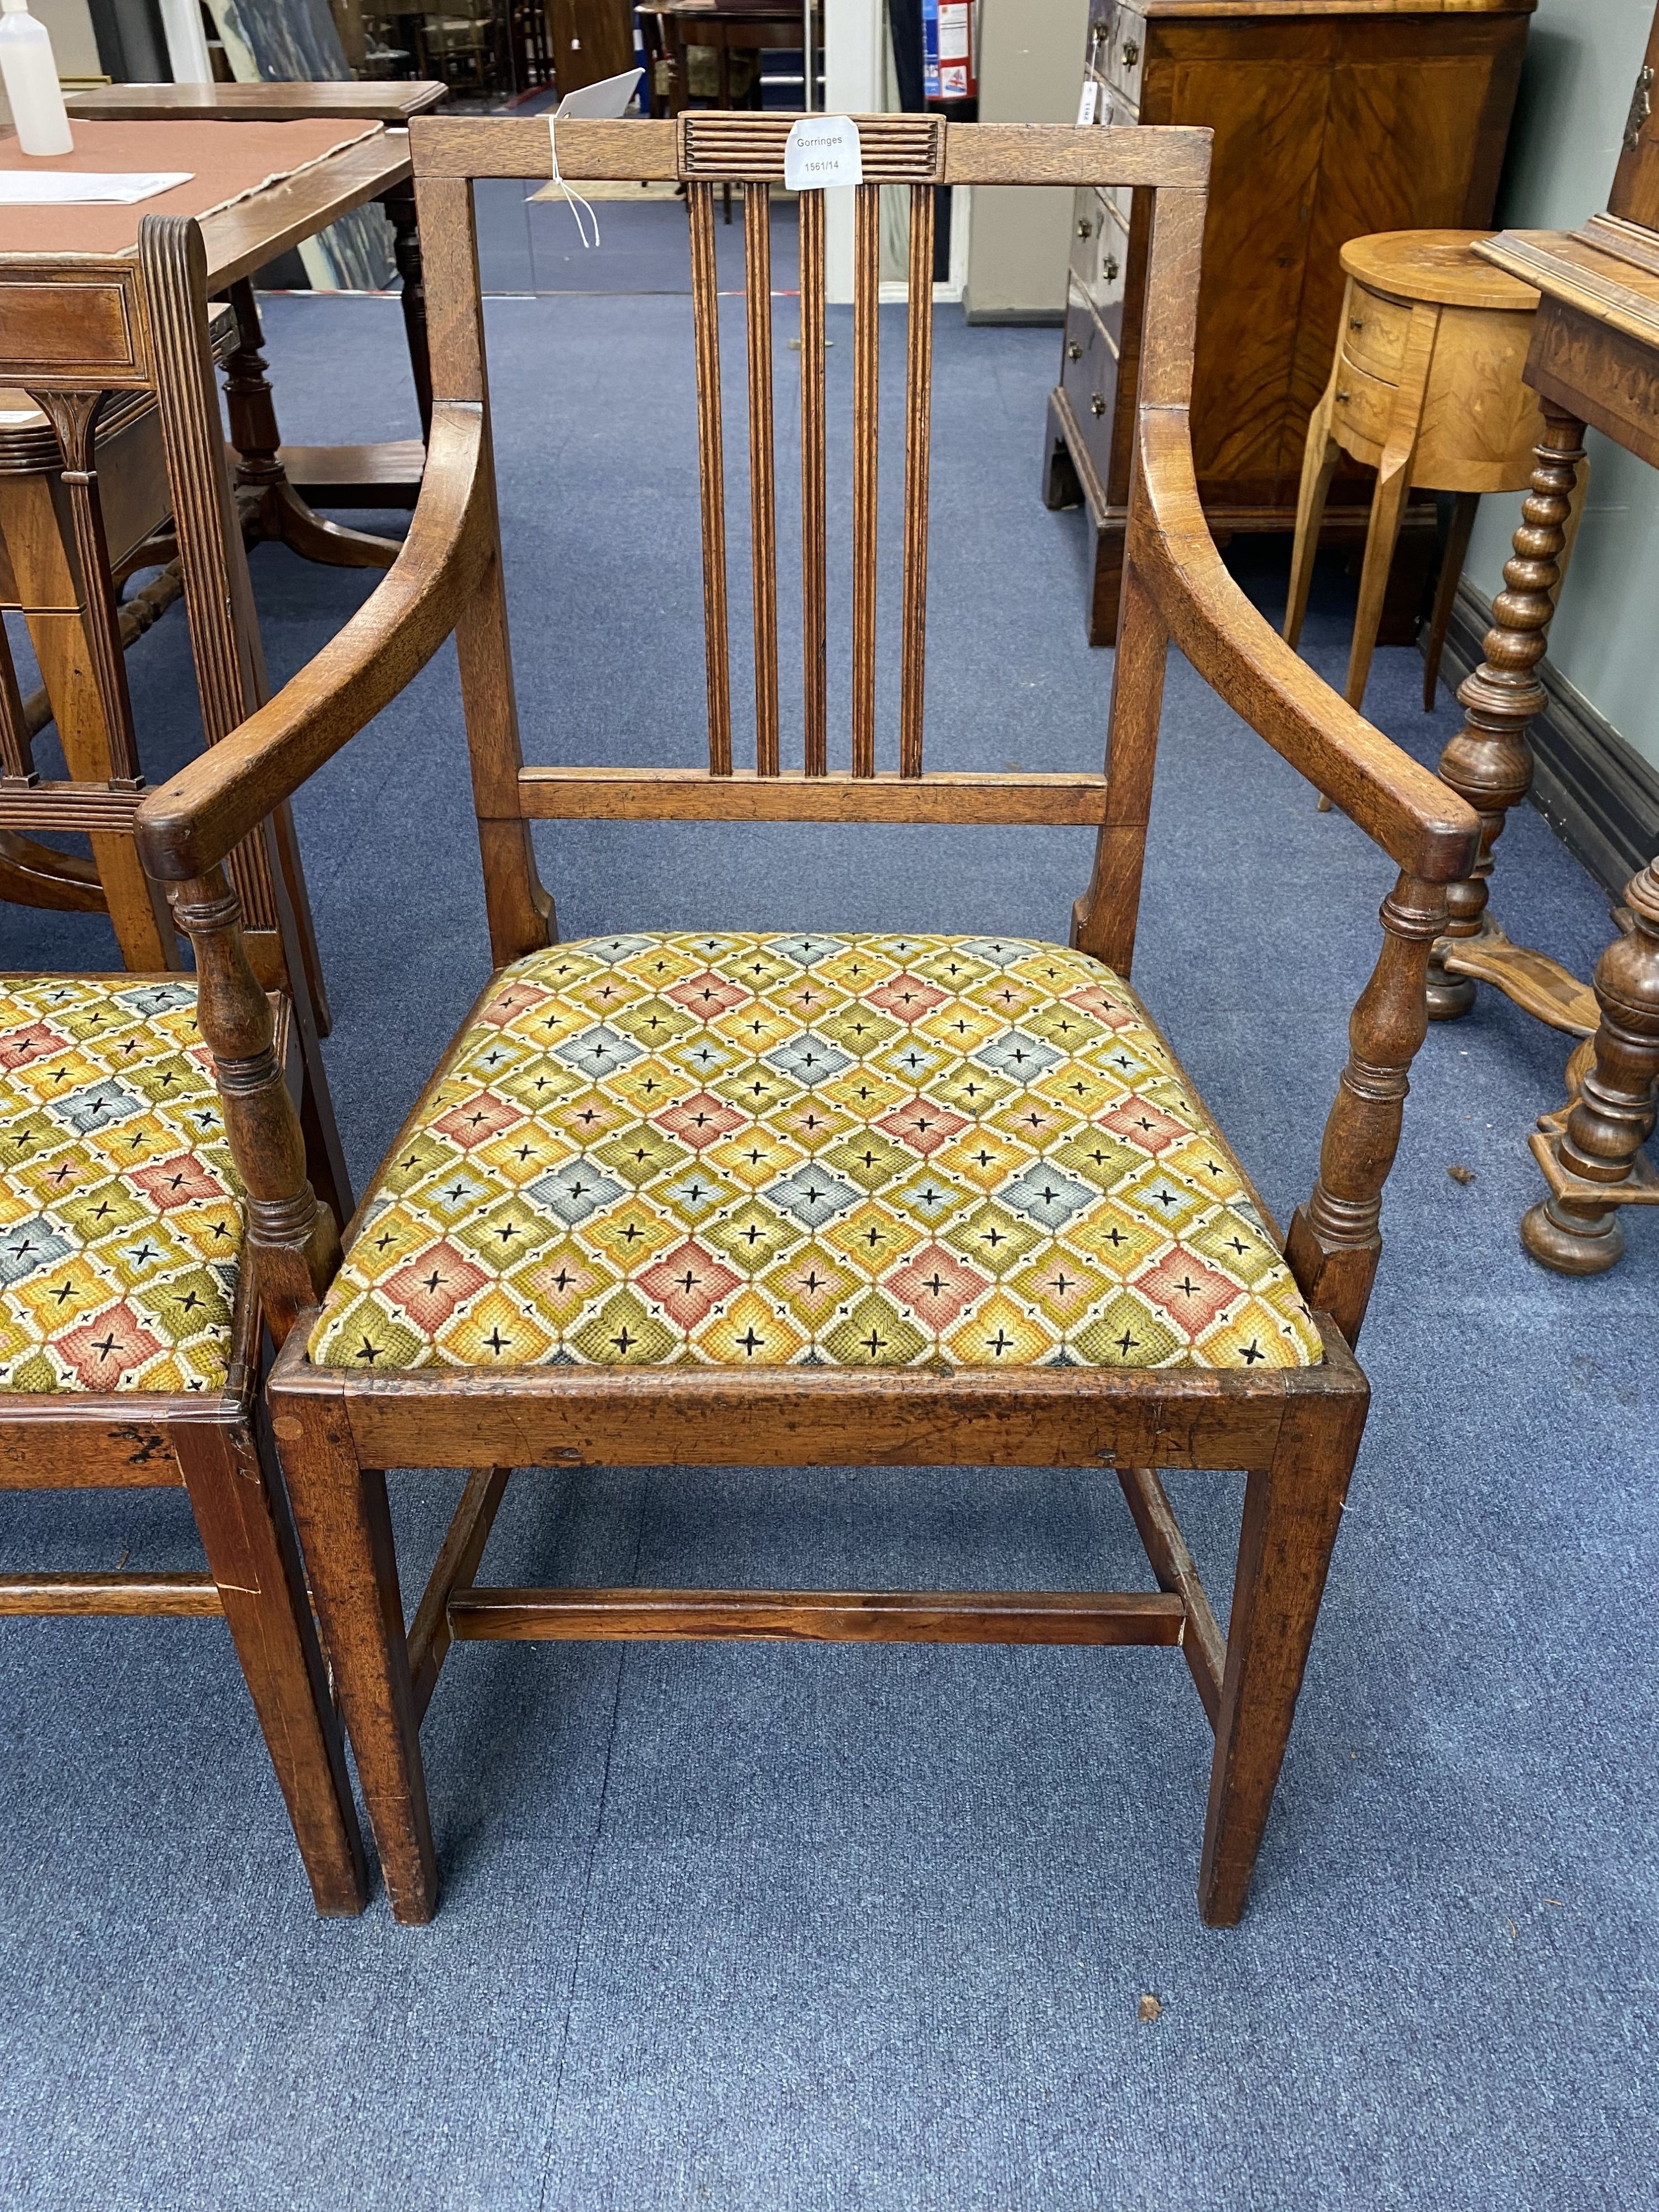 A Regency mahogany elbow chair and three others